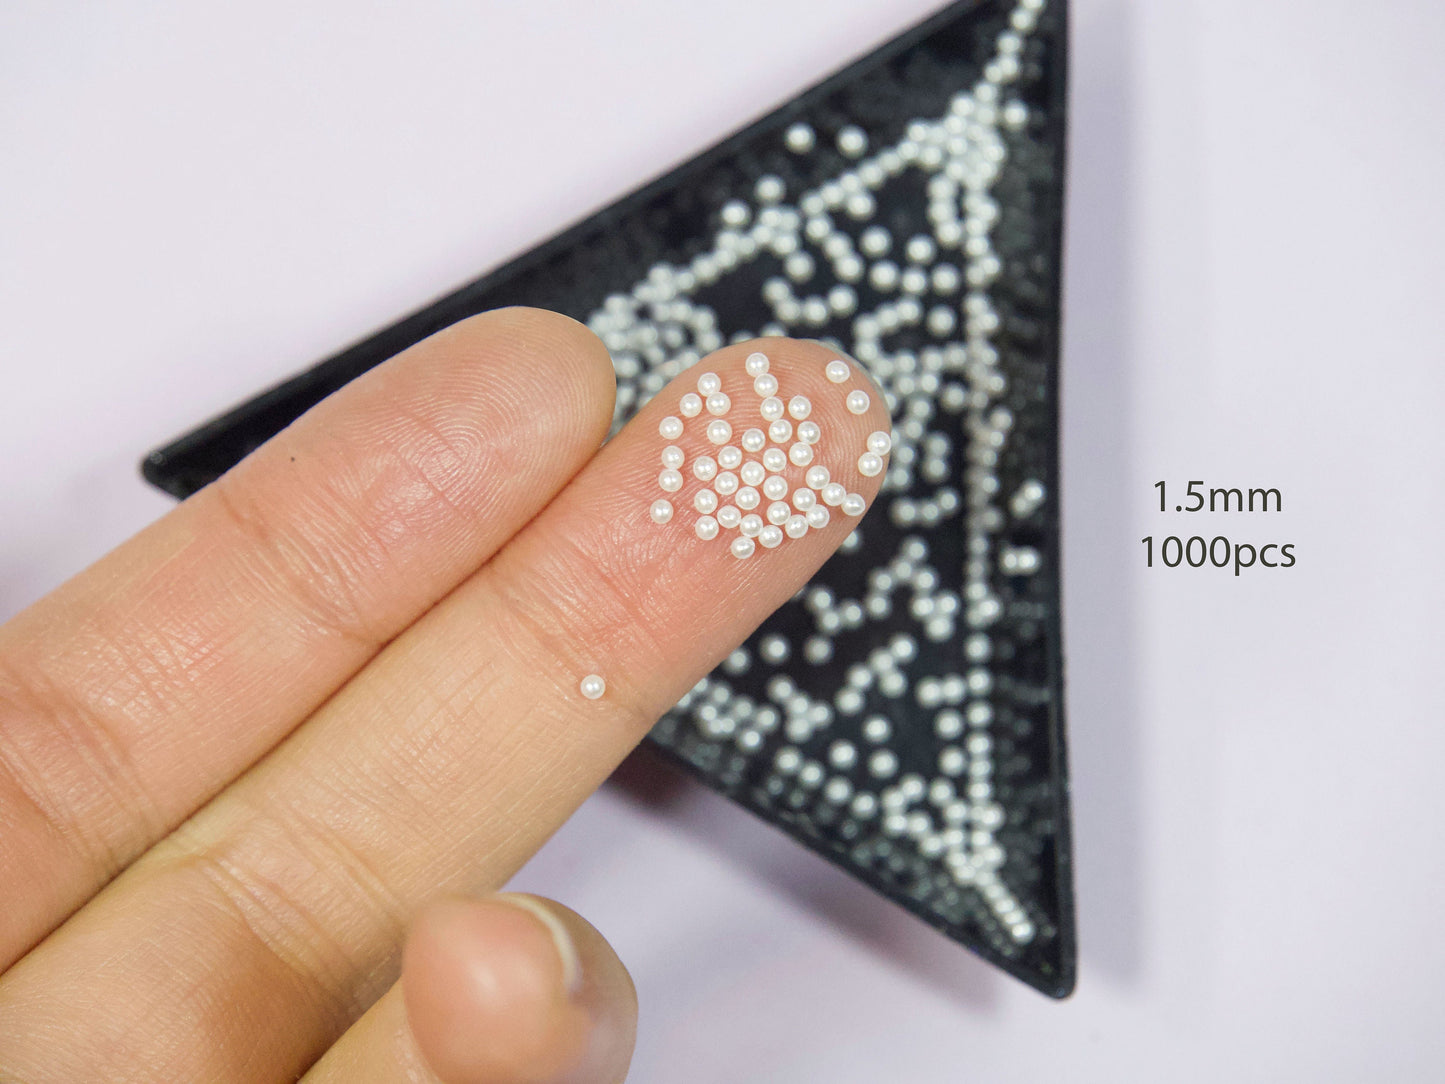 1000pcs Very Tiny Solid Pearl Sphere Nail Decals